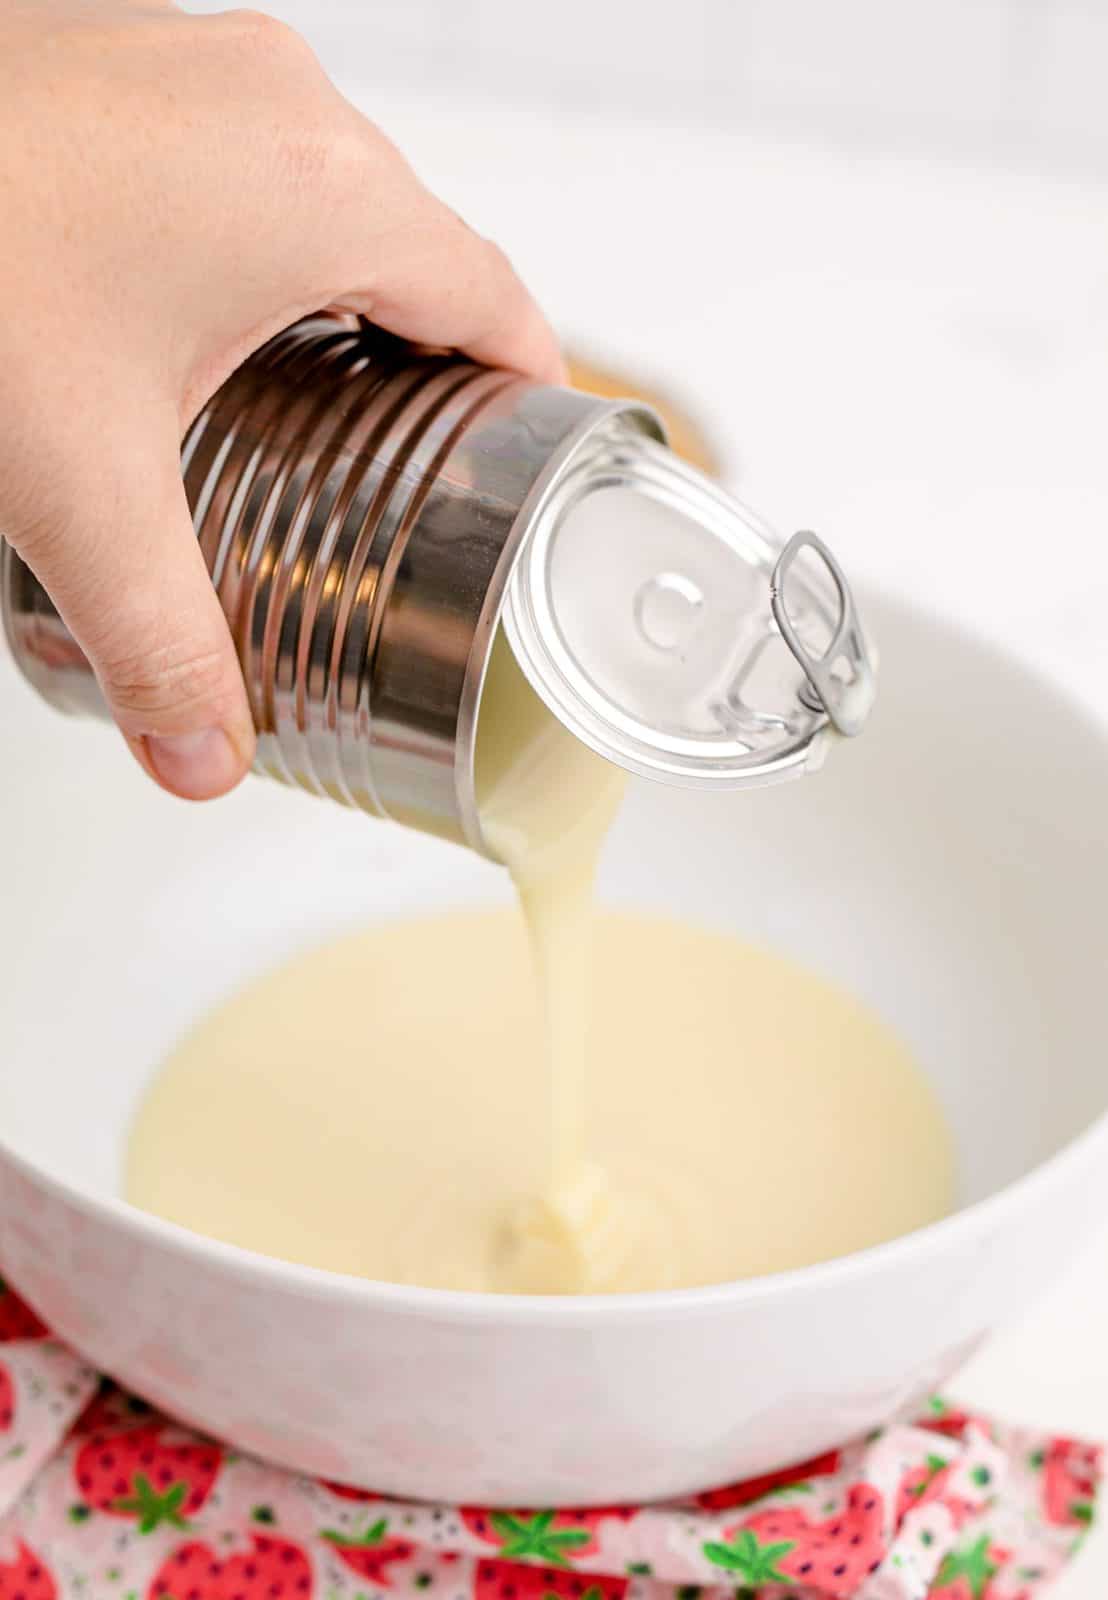 Sweetened condensed milk being poured into a bowl.